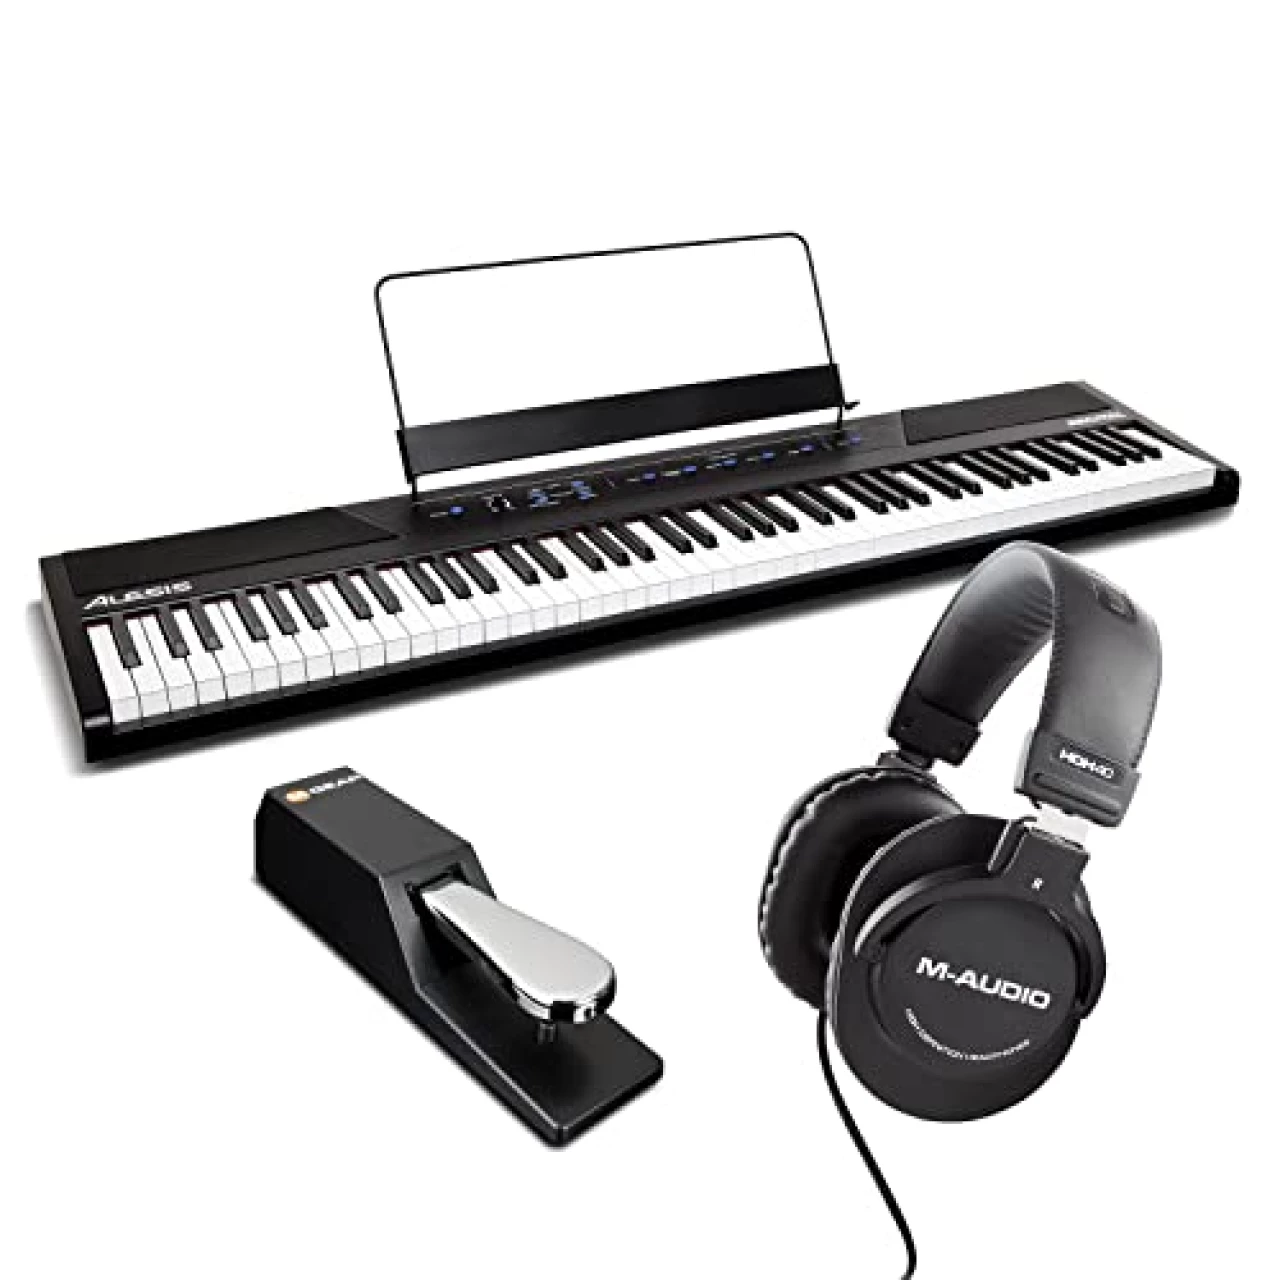 Alesis Recital – 88 Key Digital Piano Keyboard with Semi Weighted Keys, 5 Voices, M-Audio Sustain Pedal and HDH40 Piano Headphones